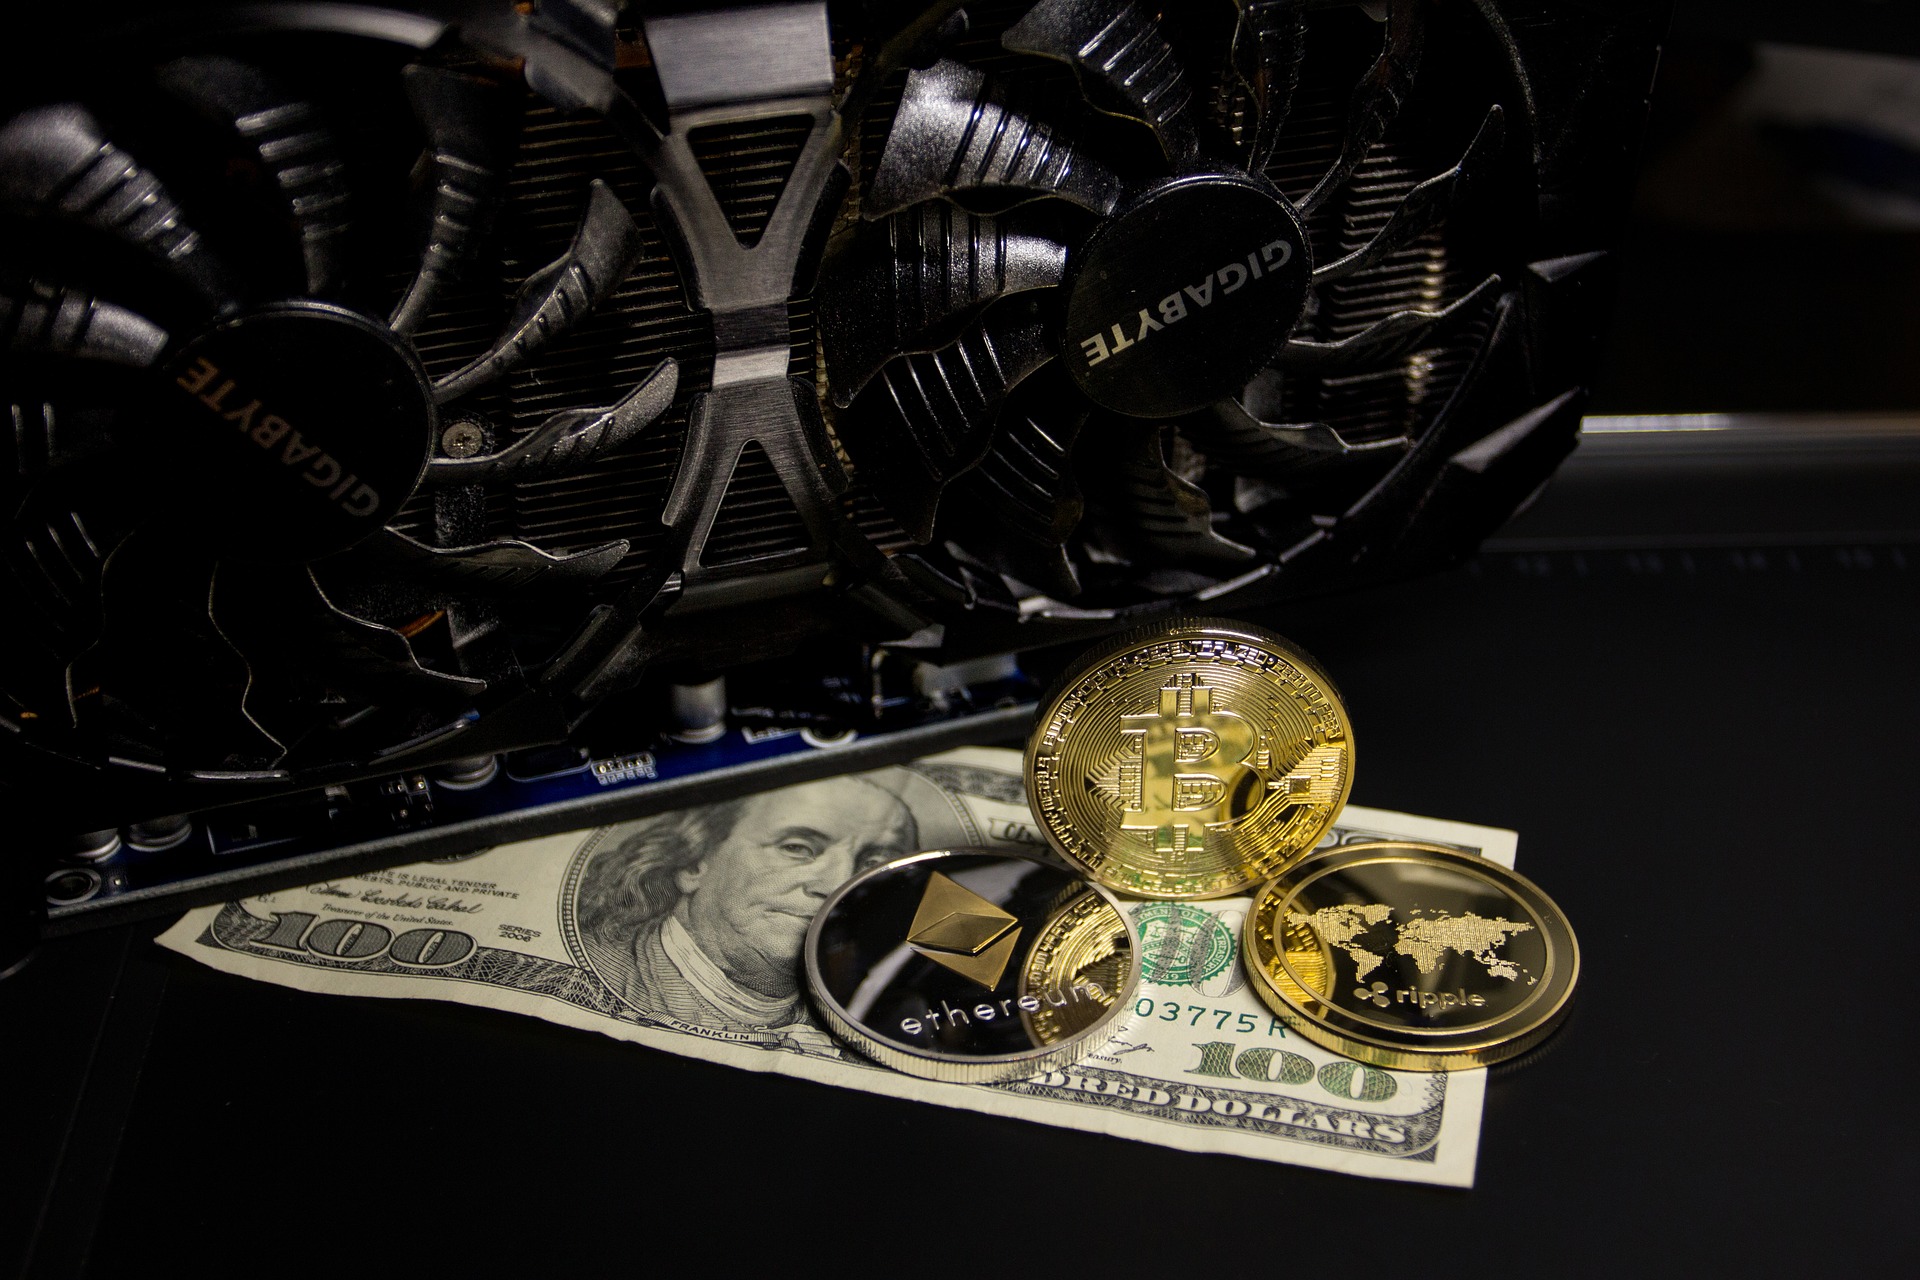 Is Crypto Mining Still Profitable 2019 / Three Men Netted in $722 Million Crypto Mining Fraud ... - Those who bought mining equipment earlier keep mining.